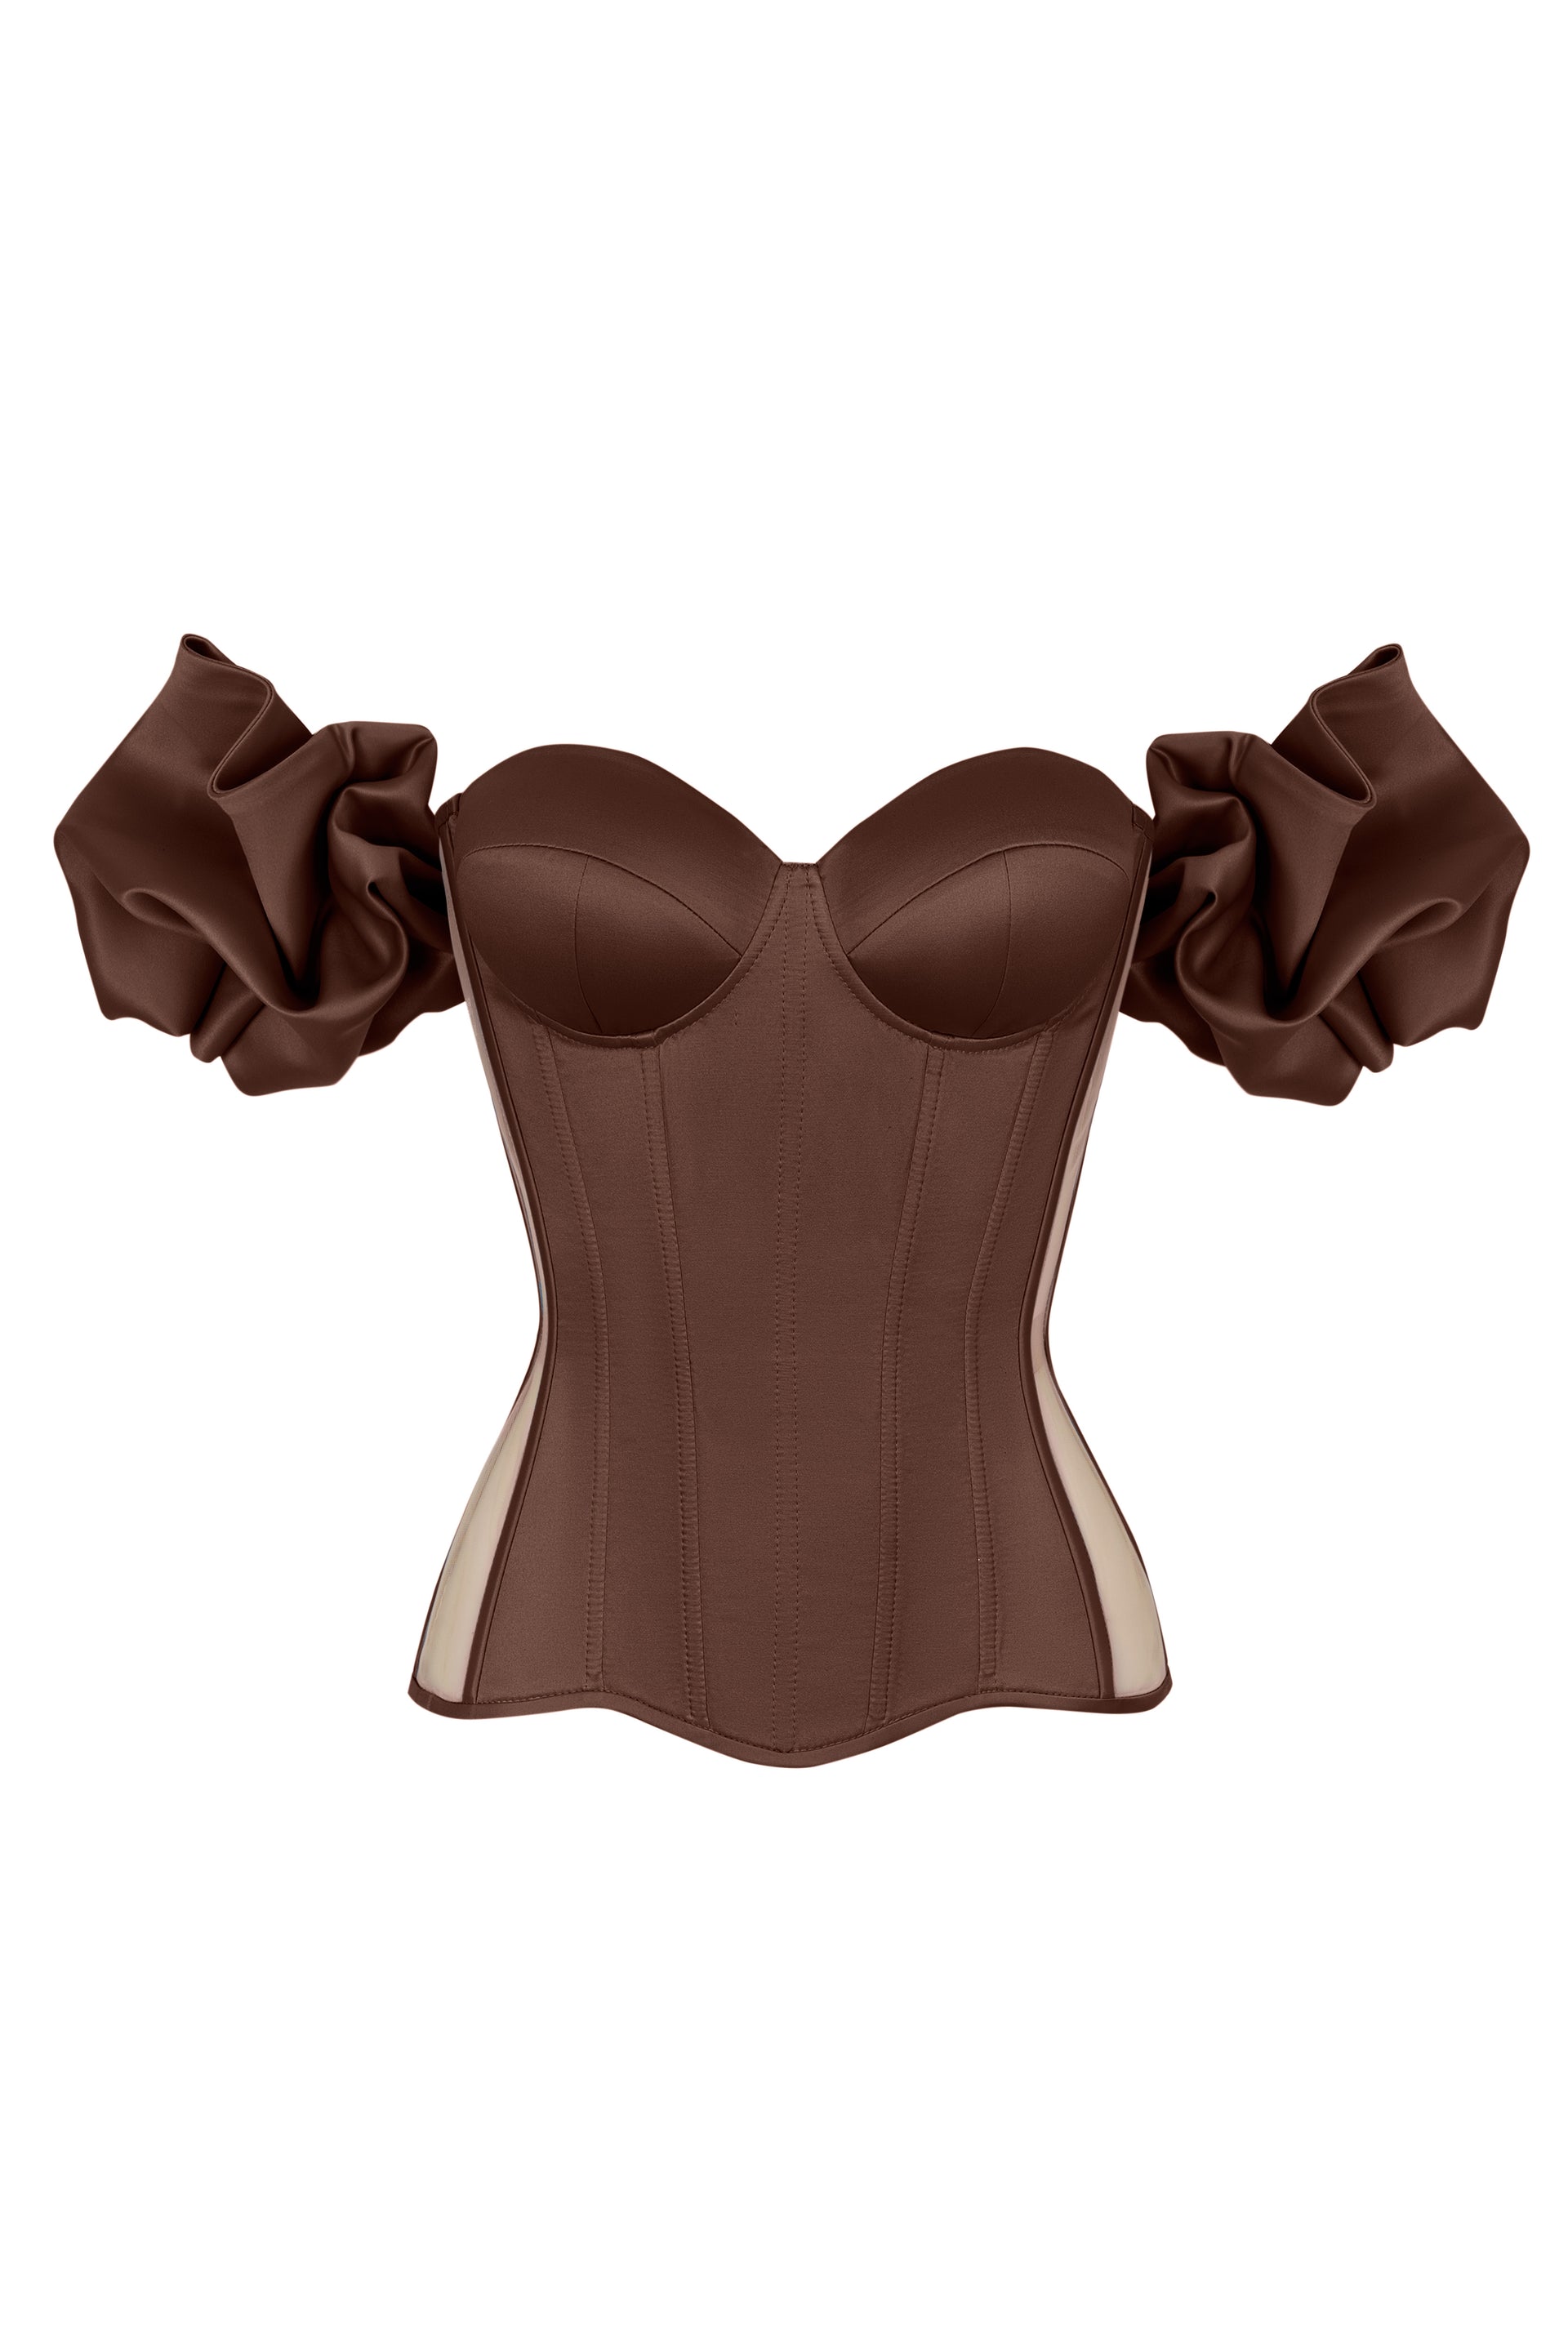 STATNAIA l Brown satin corset with with transparent back and detachable  sleeves